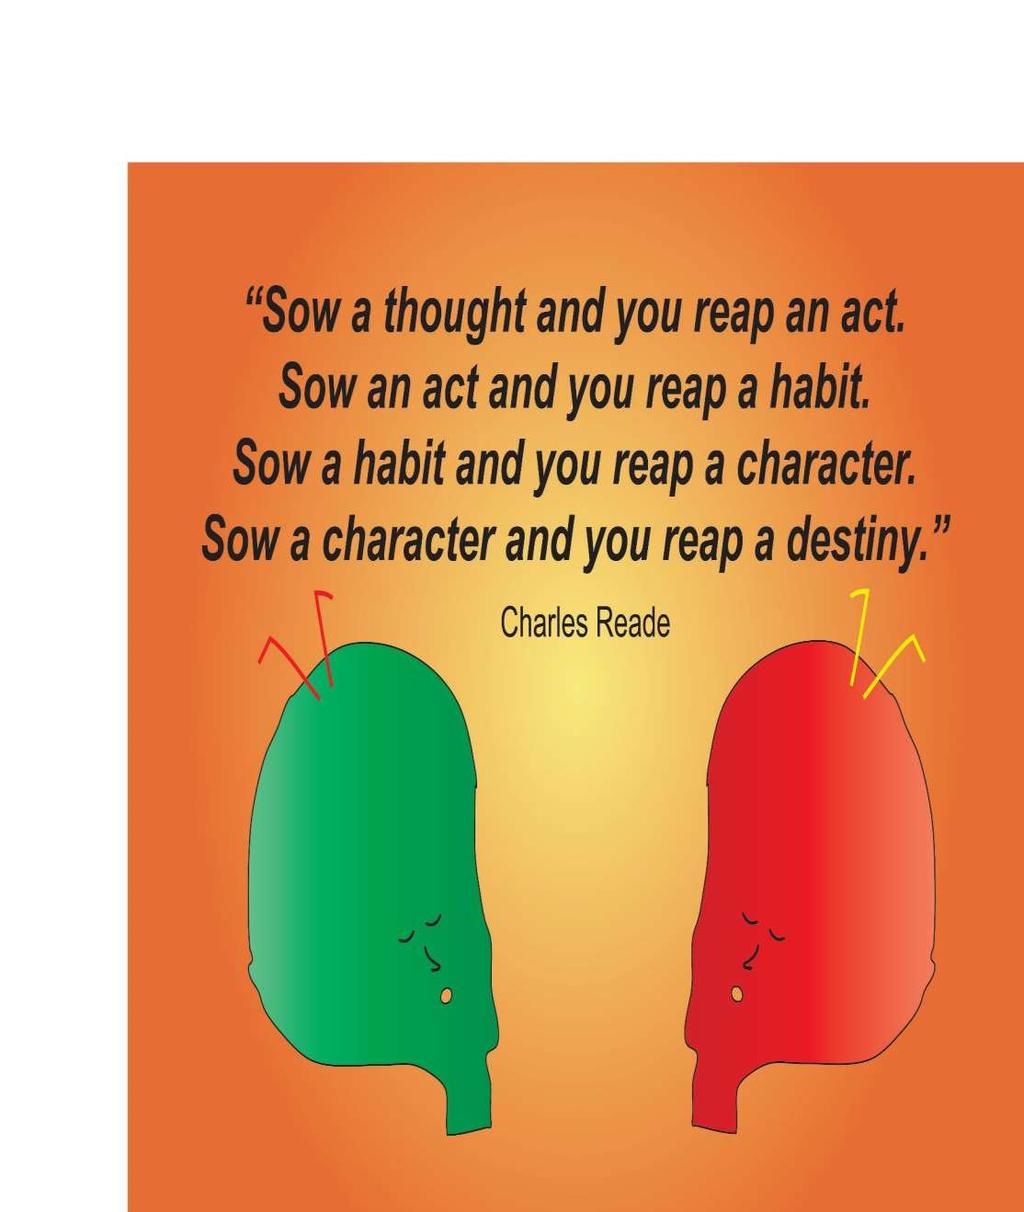 Sow a thought and you reap an act. Sow an act and you reap a habit.